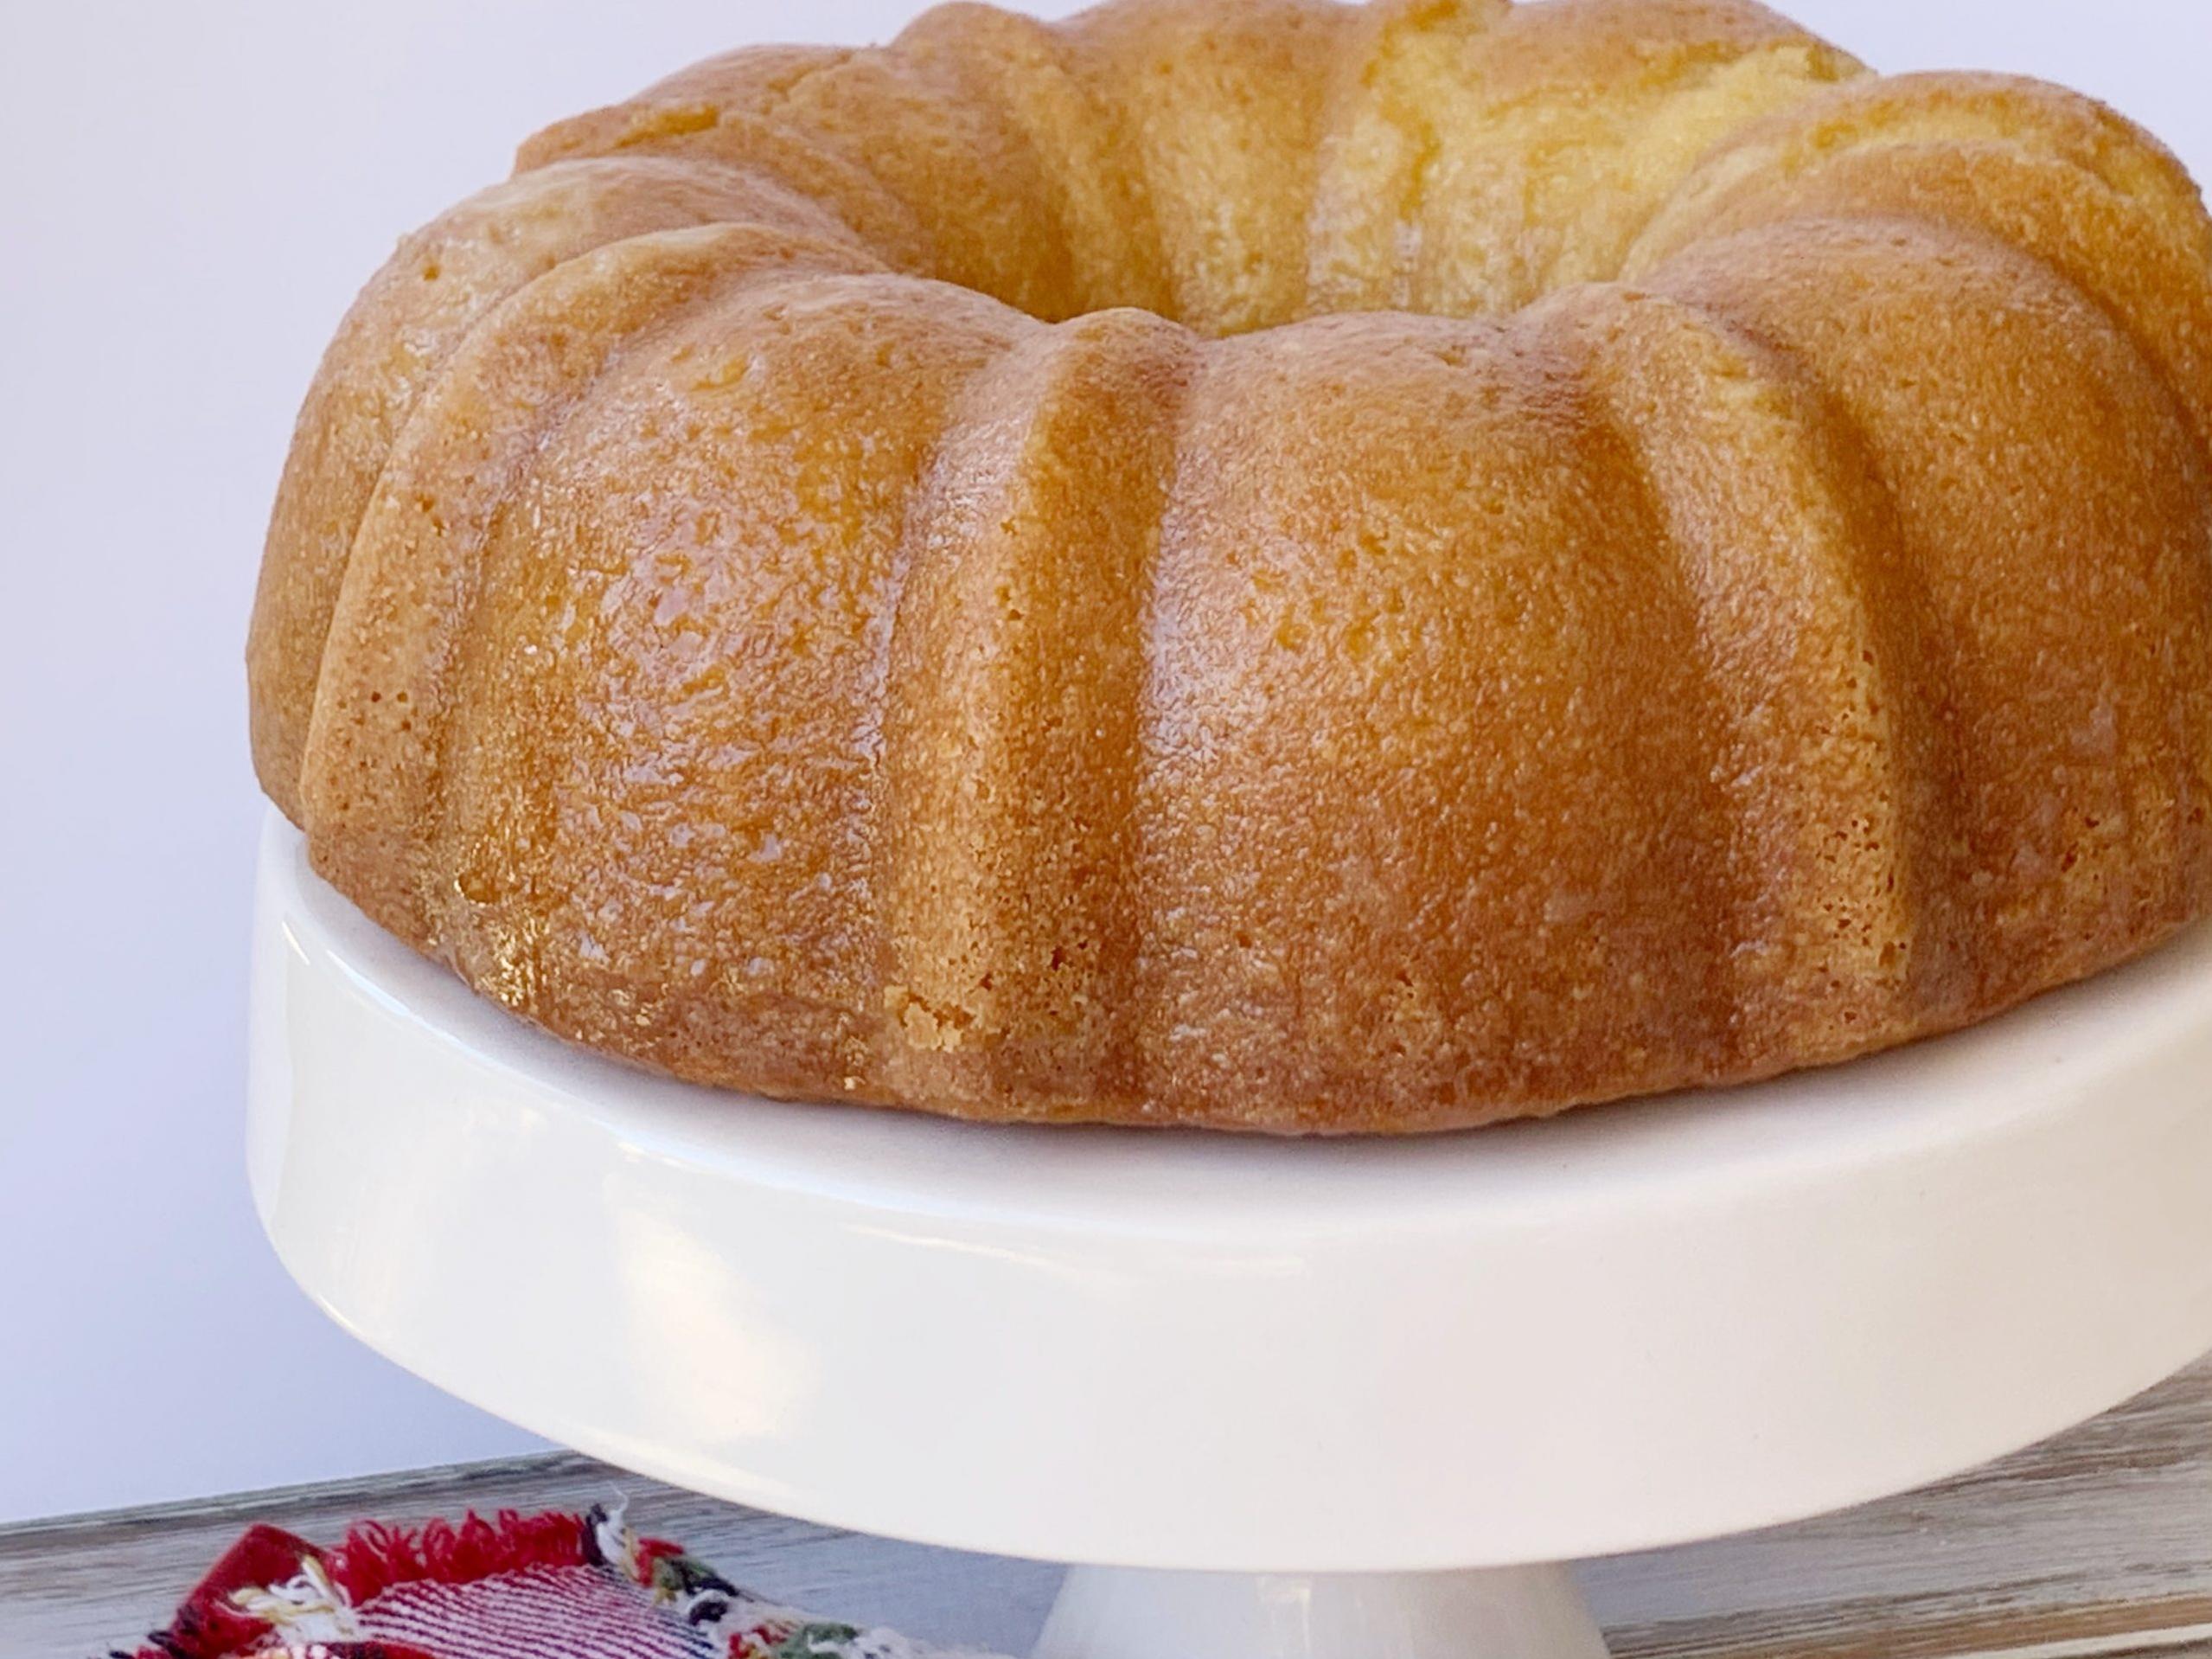  Pair a slice of this pound cake with a hot cup of coffee for a cozy winter treat